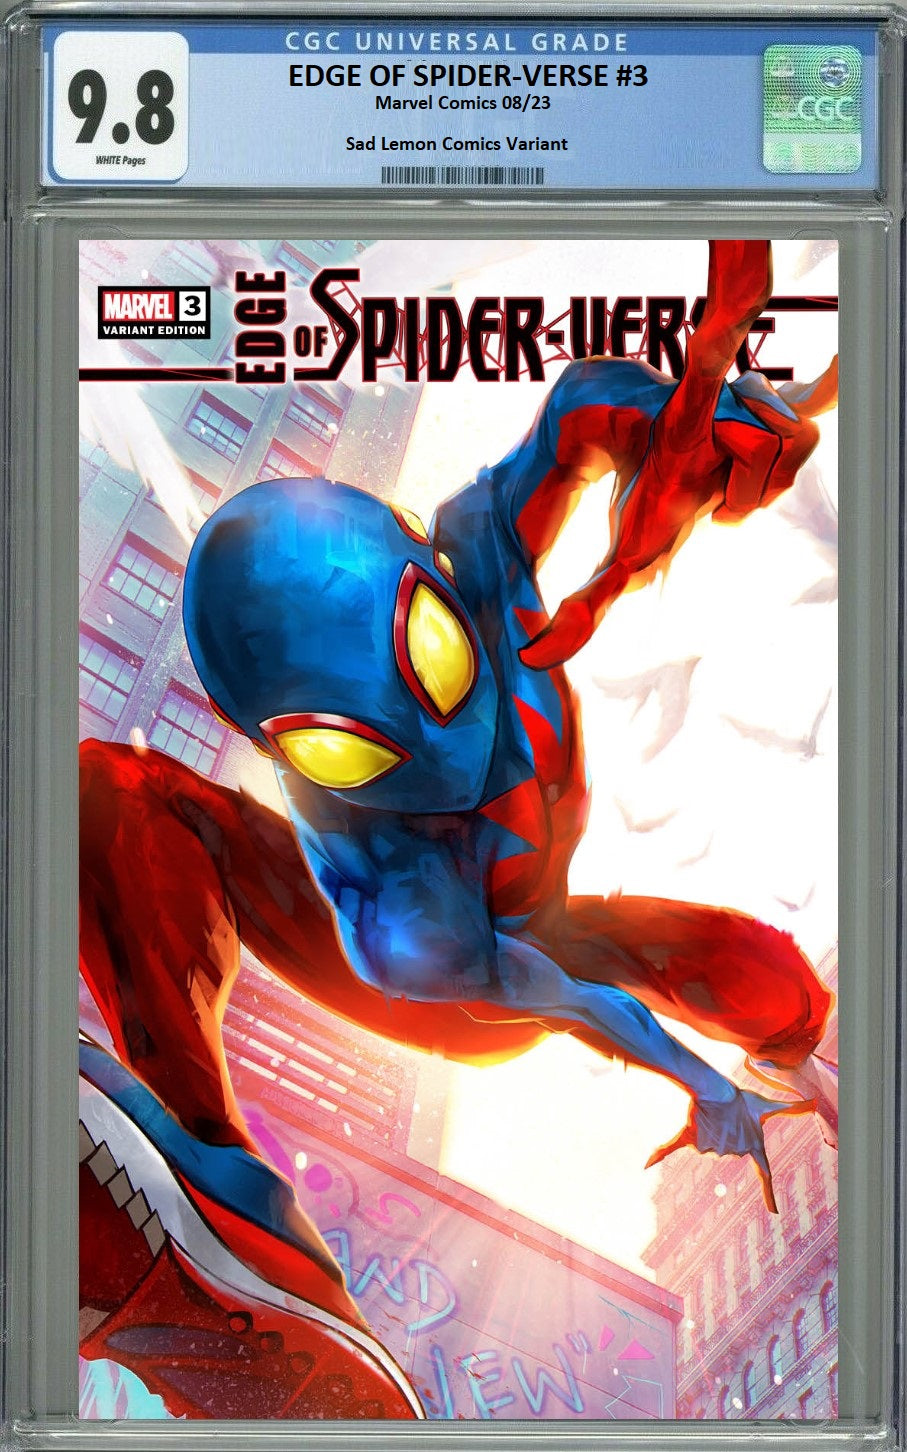 EDGE OF SPIDER-VERSE #3 IVAN TAO TRADE DRESS VARIANT LIMITED TO 3000 COPIES CGC 9.8 PREORDER